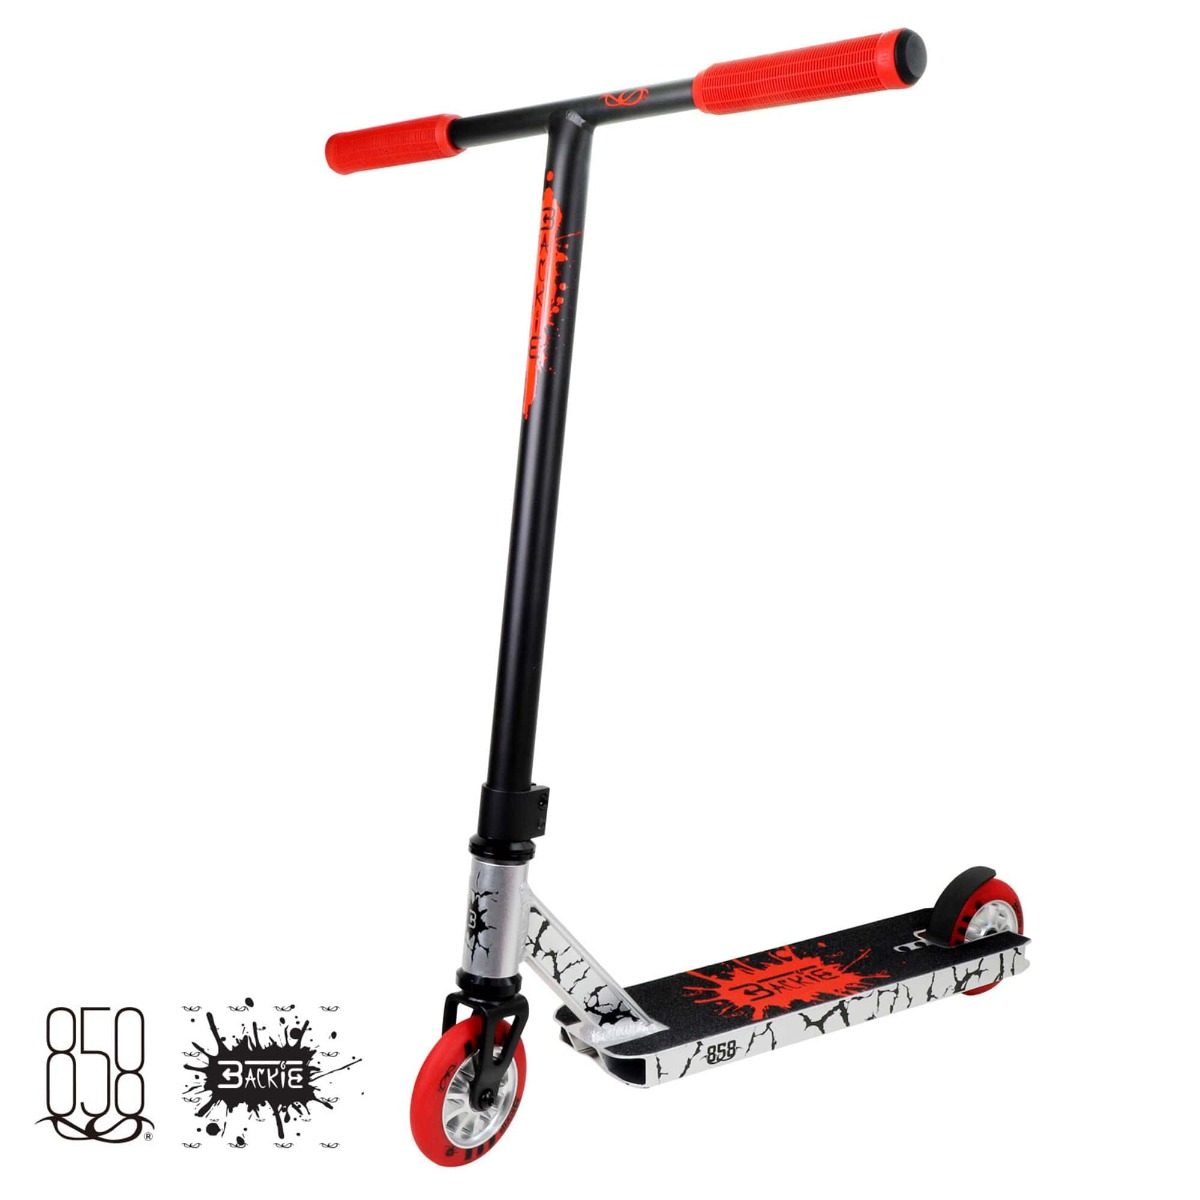 An image of Ride 858 Backie Red Silver Stunt Scooter